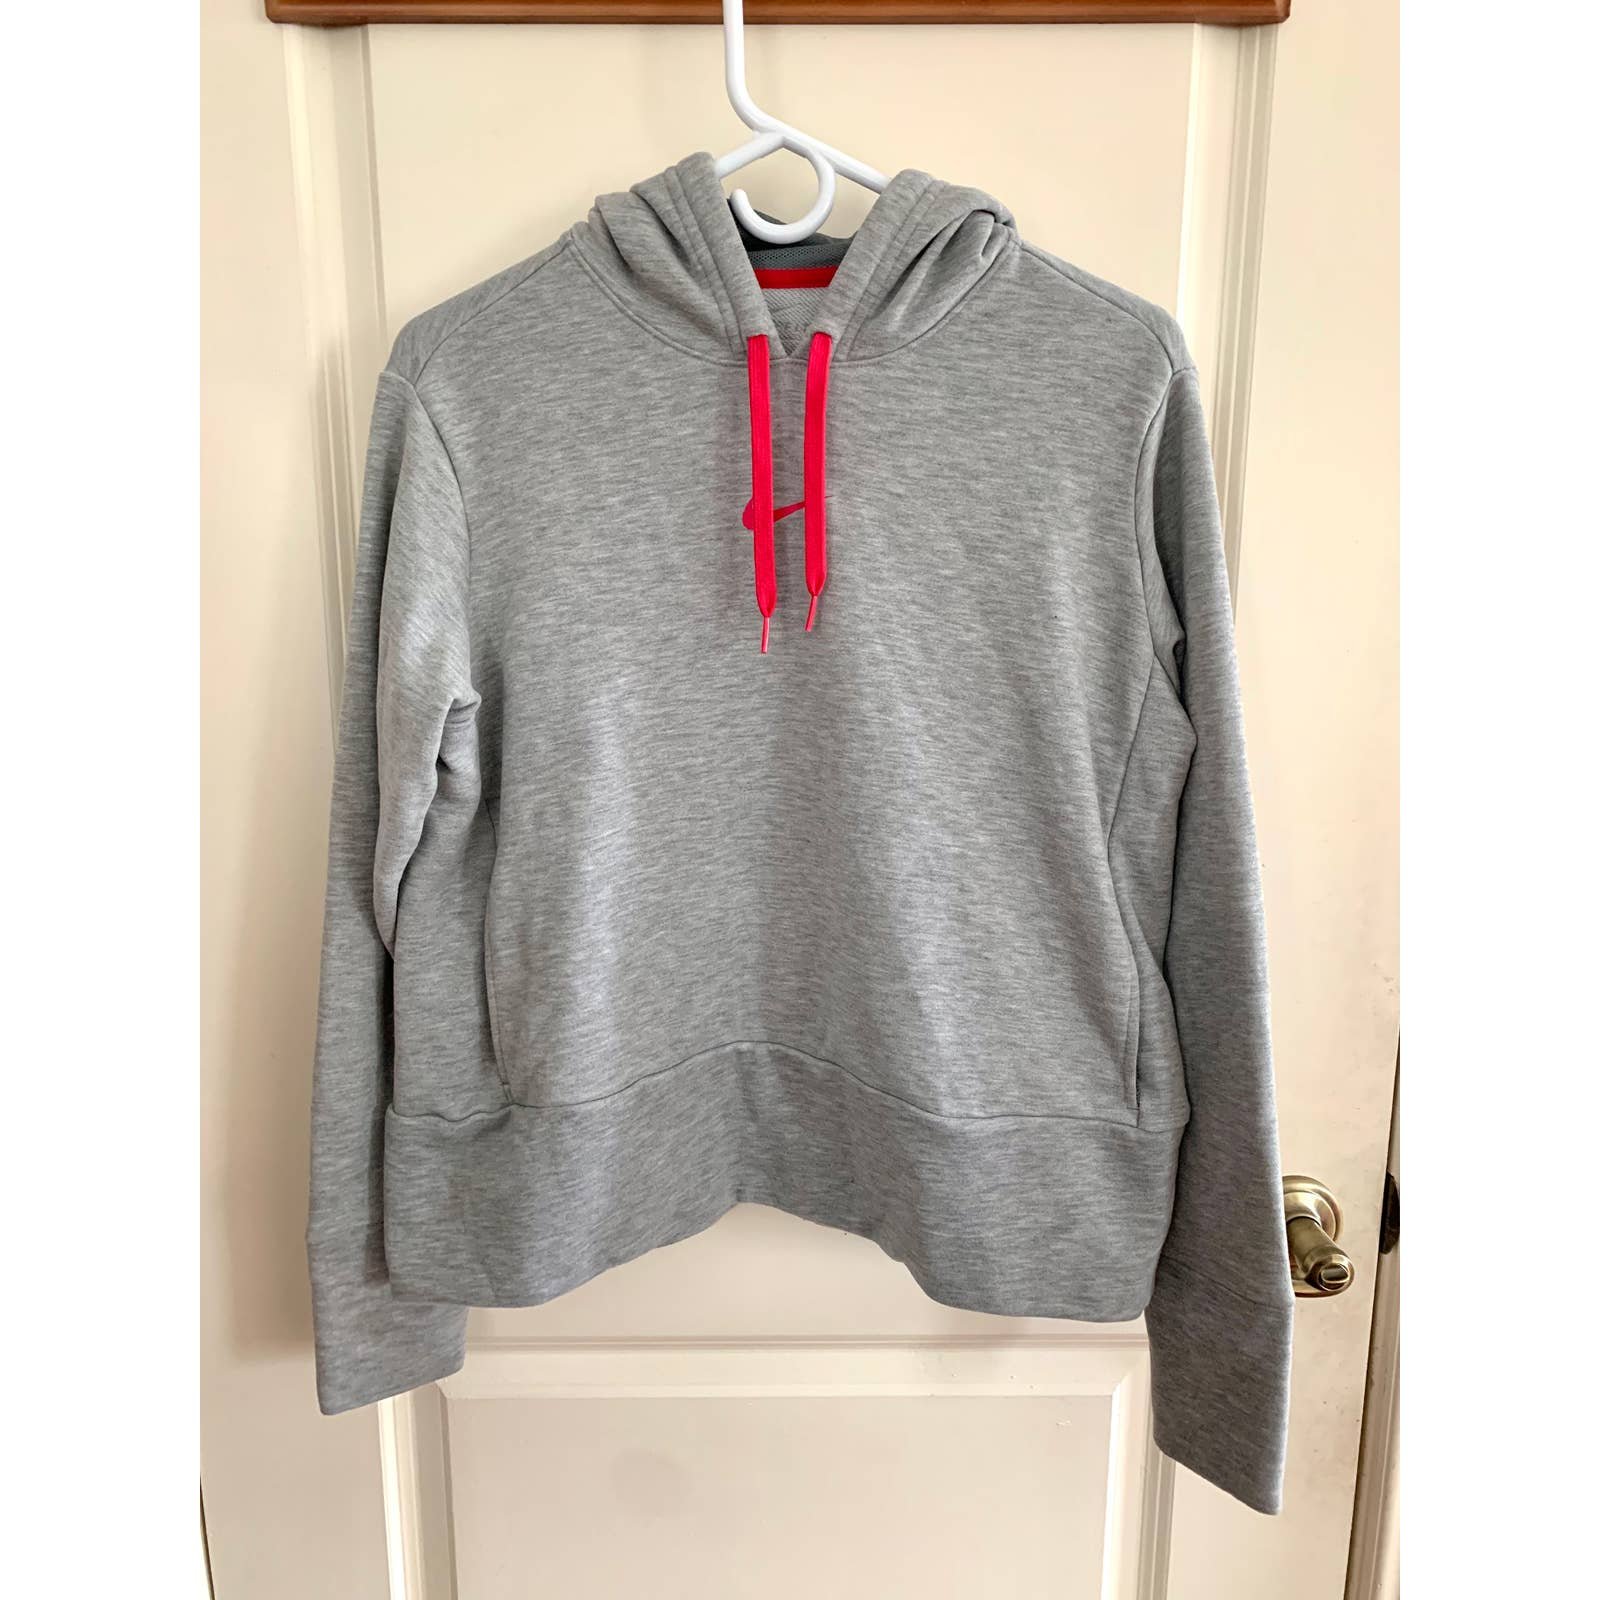 Stylish Nike Heathered Hoodie in Pink/Gray with Pocket nJ6FYrq2E on sale